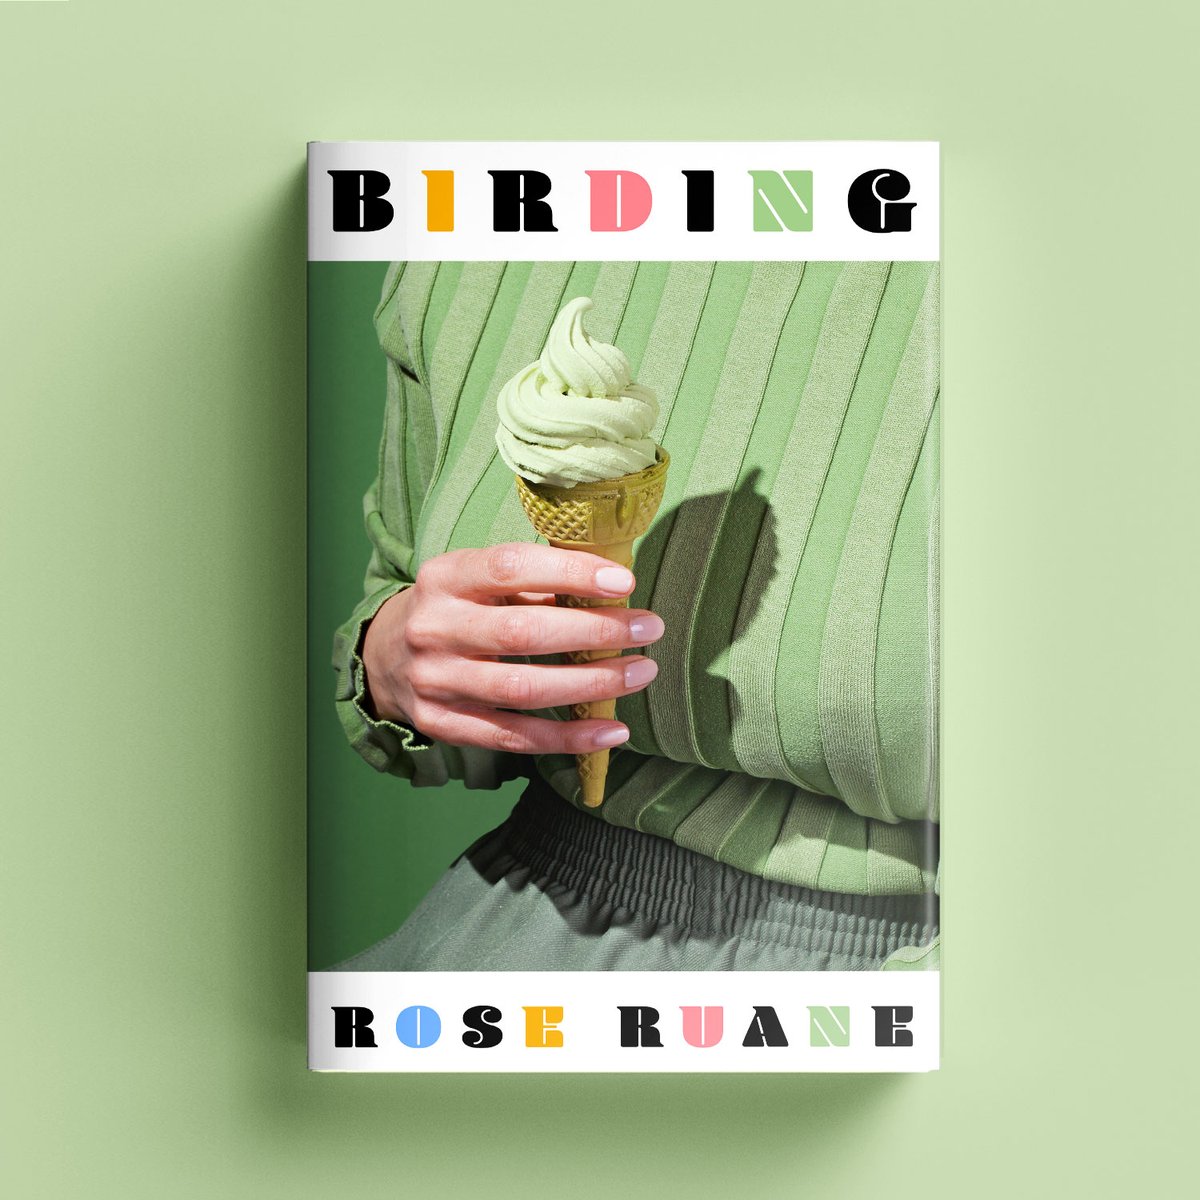 Birding by @regretteruane follows two women, untangling the damaging details of their past in the hope for a better future, trying to take flight on clipped wings. Out today: brnw.ch/21wJoiz